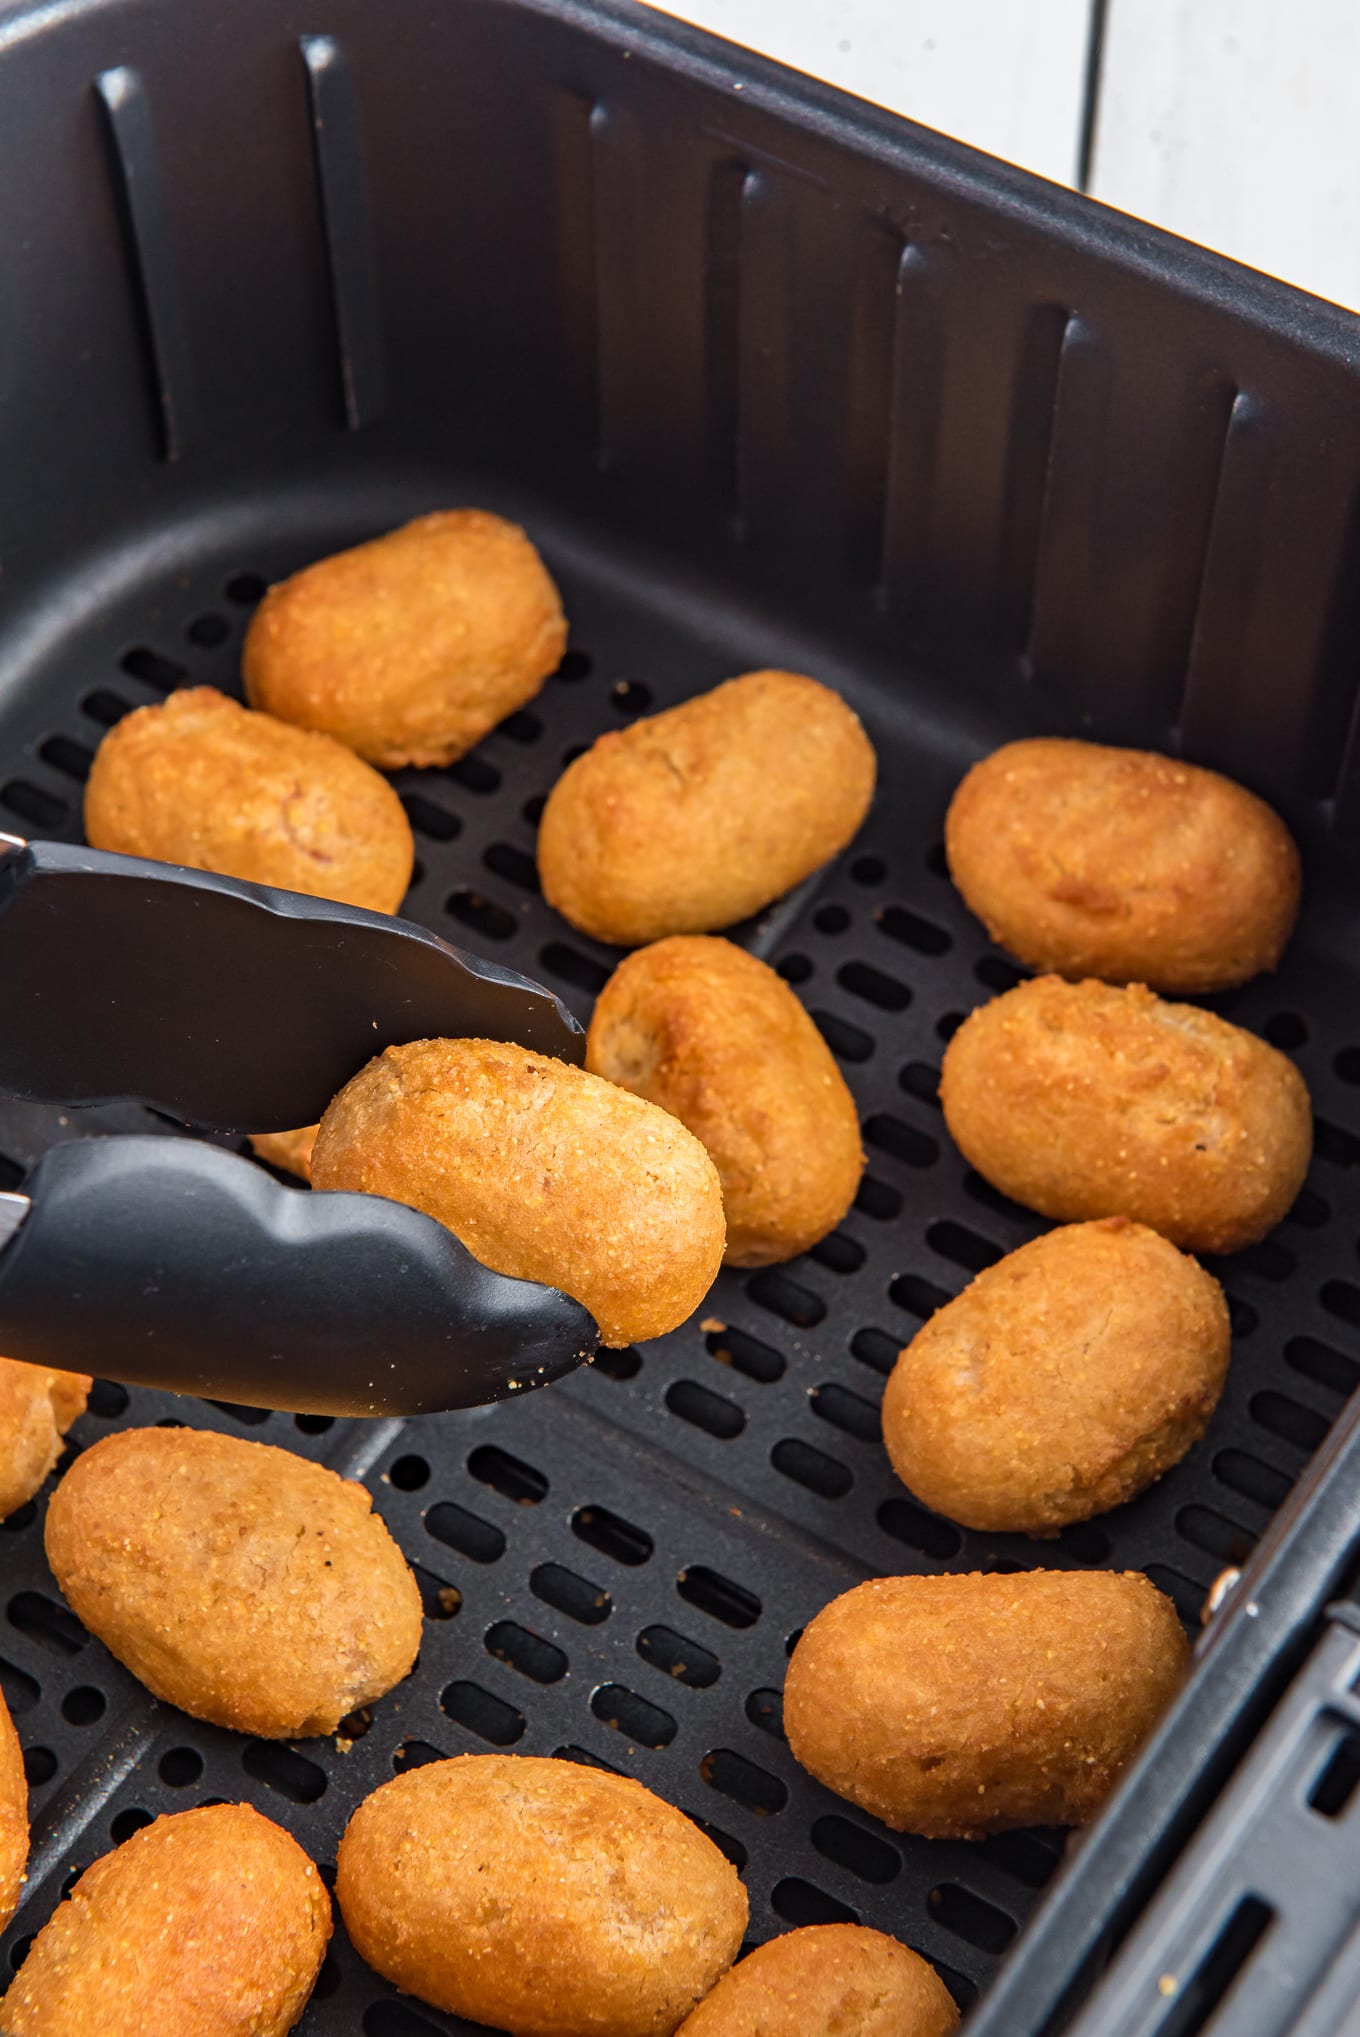 A close-up photo of mini corn dogs in an air fryer basket.